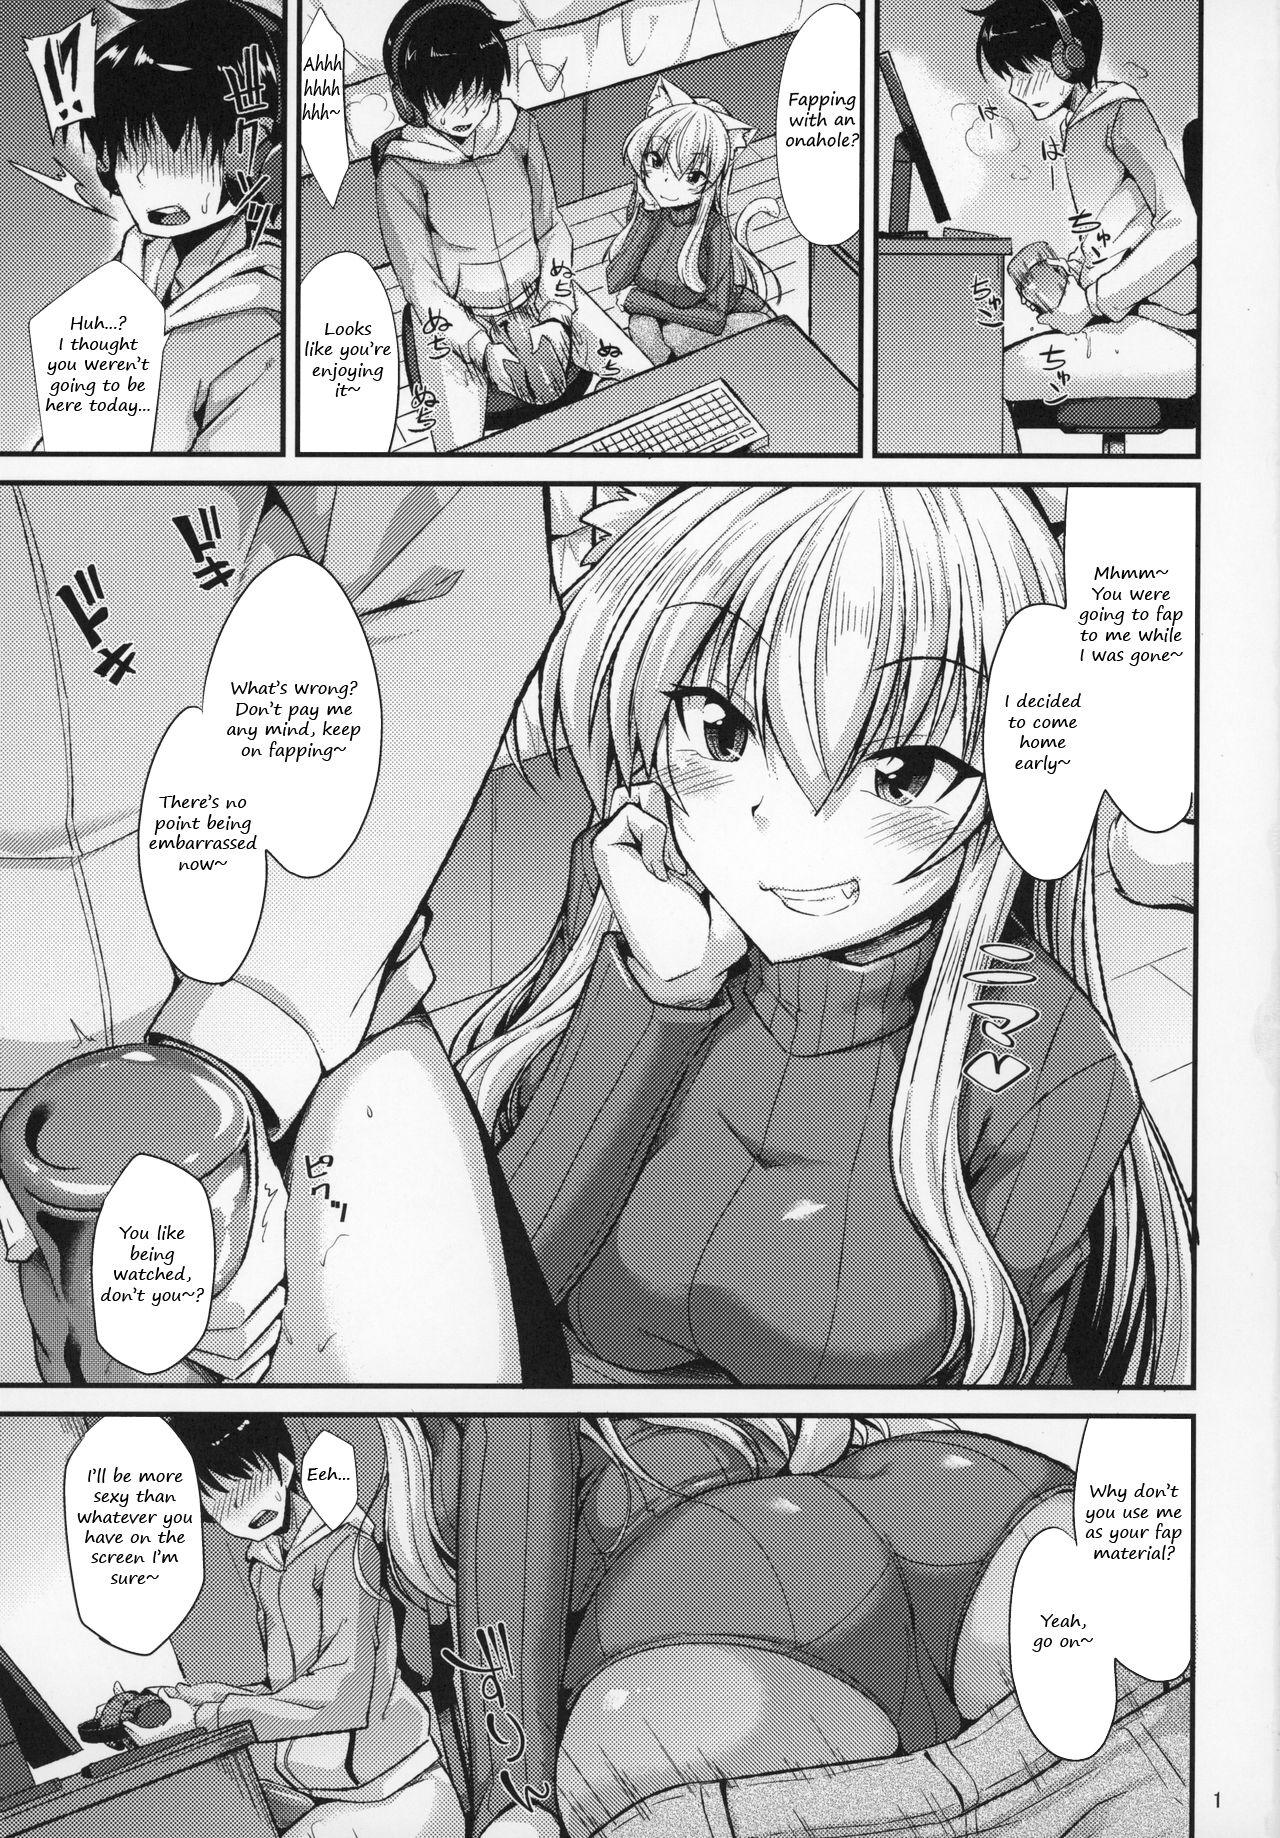 Missionary Position Porn (C97) [ENNUI (Nokoppa)] Nekomimi Onee-san to Onaho de Nyan Nyan | The cat-eared Onee-san and the Onahole [English] - Original Gay Money - Page 2